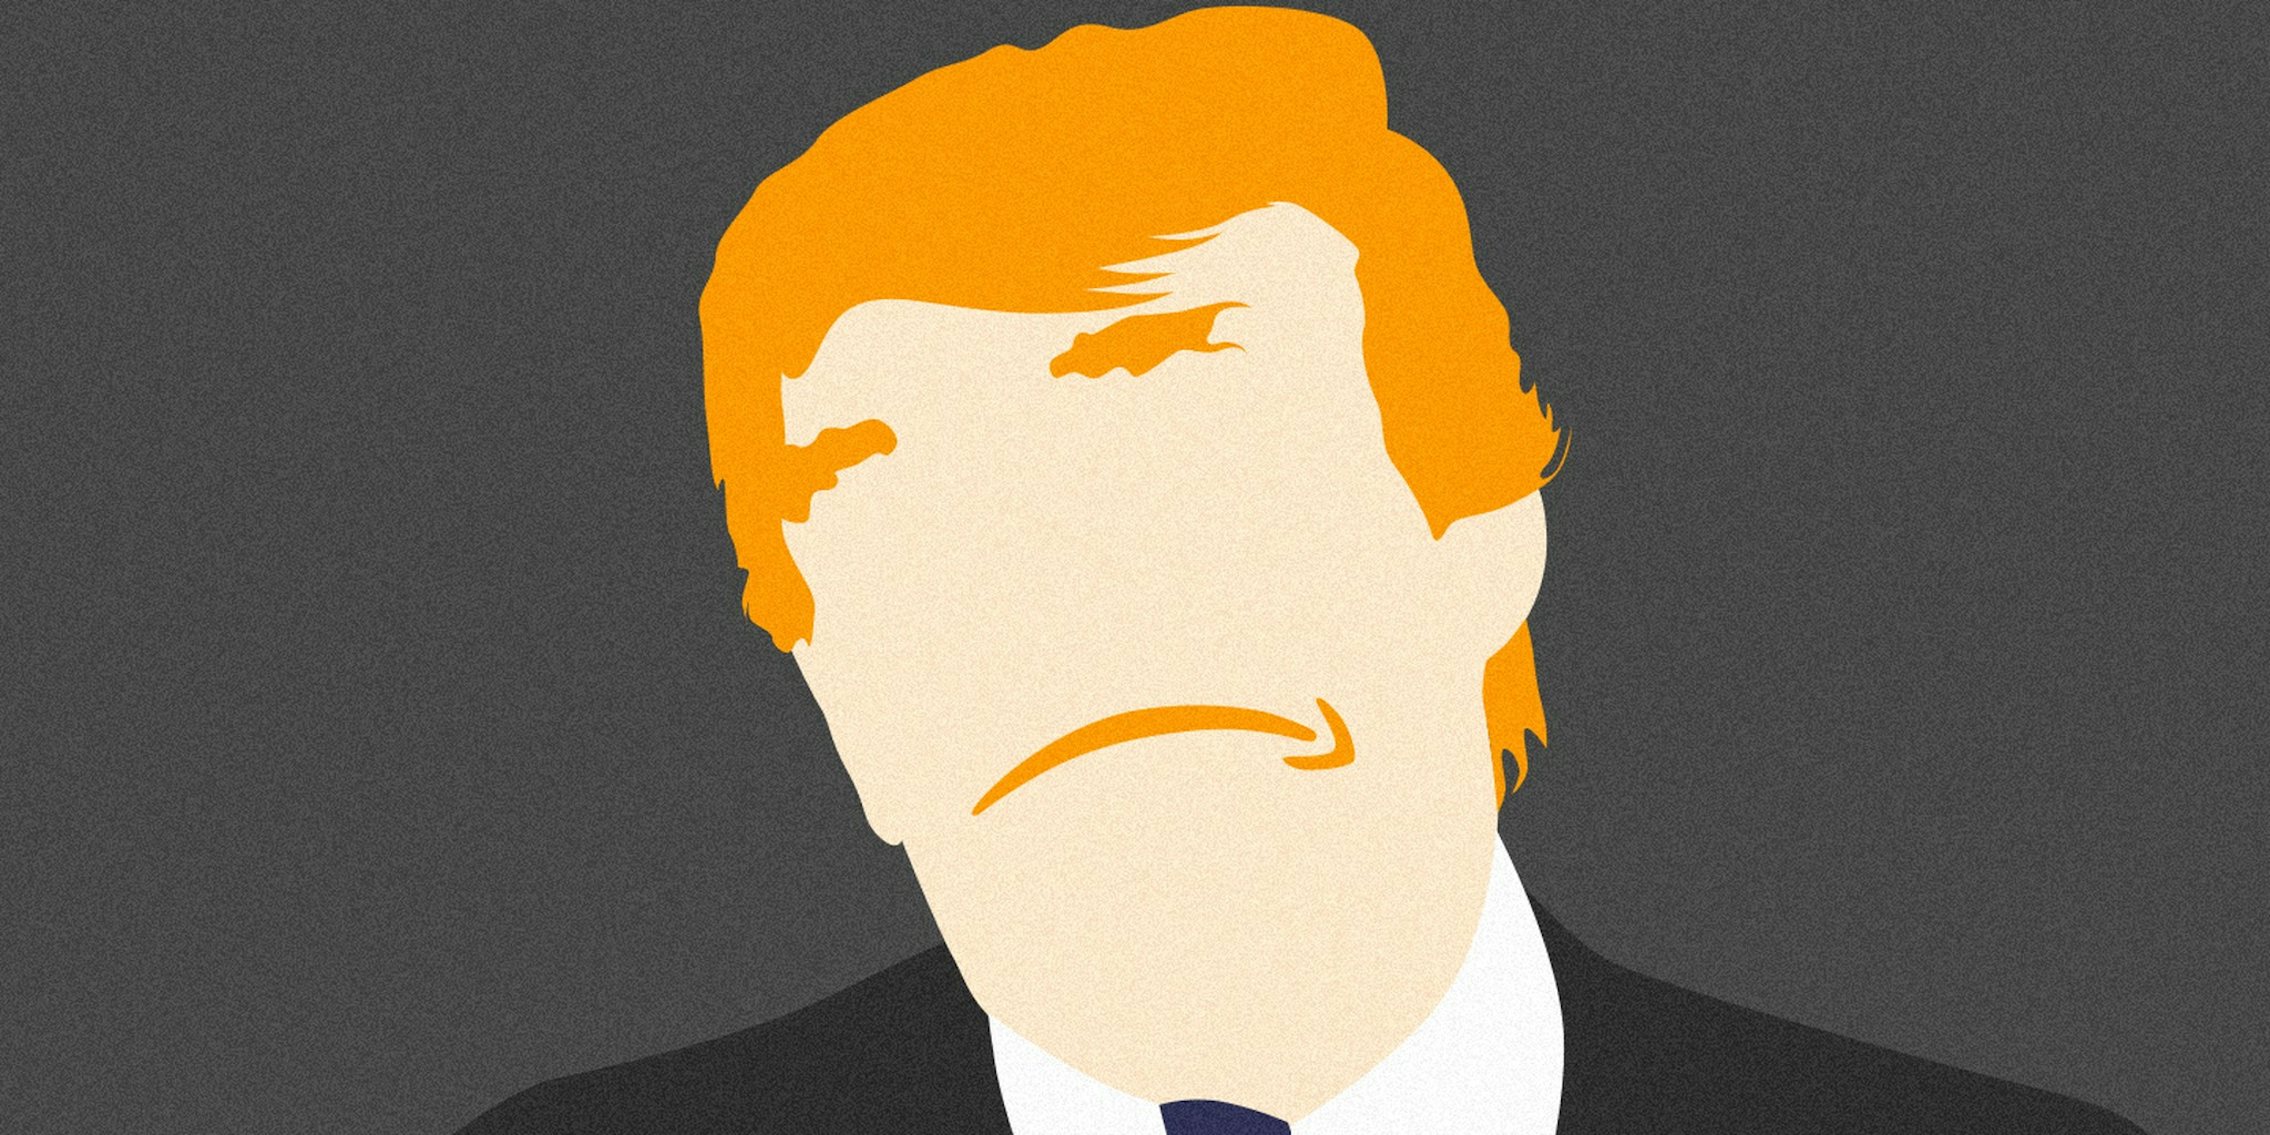 Donald Trump with Amazon logo for mouth